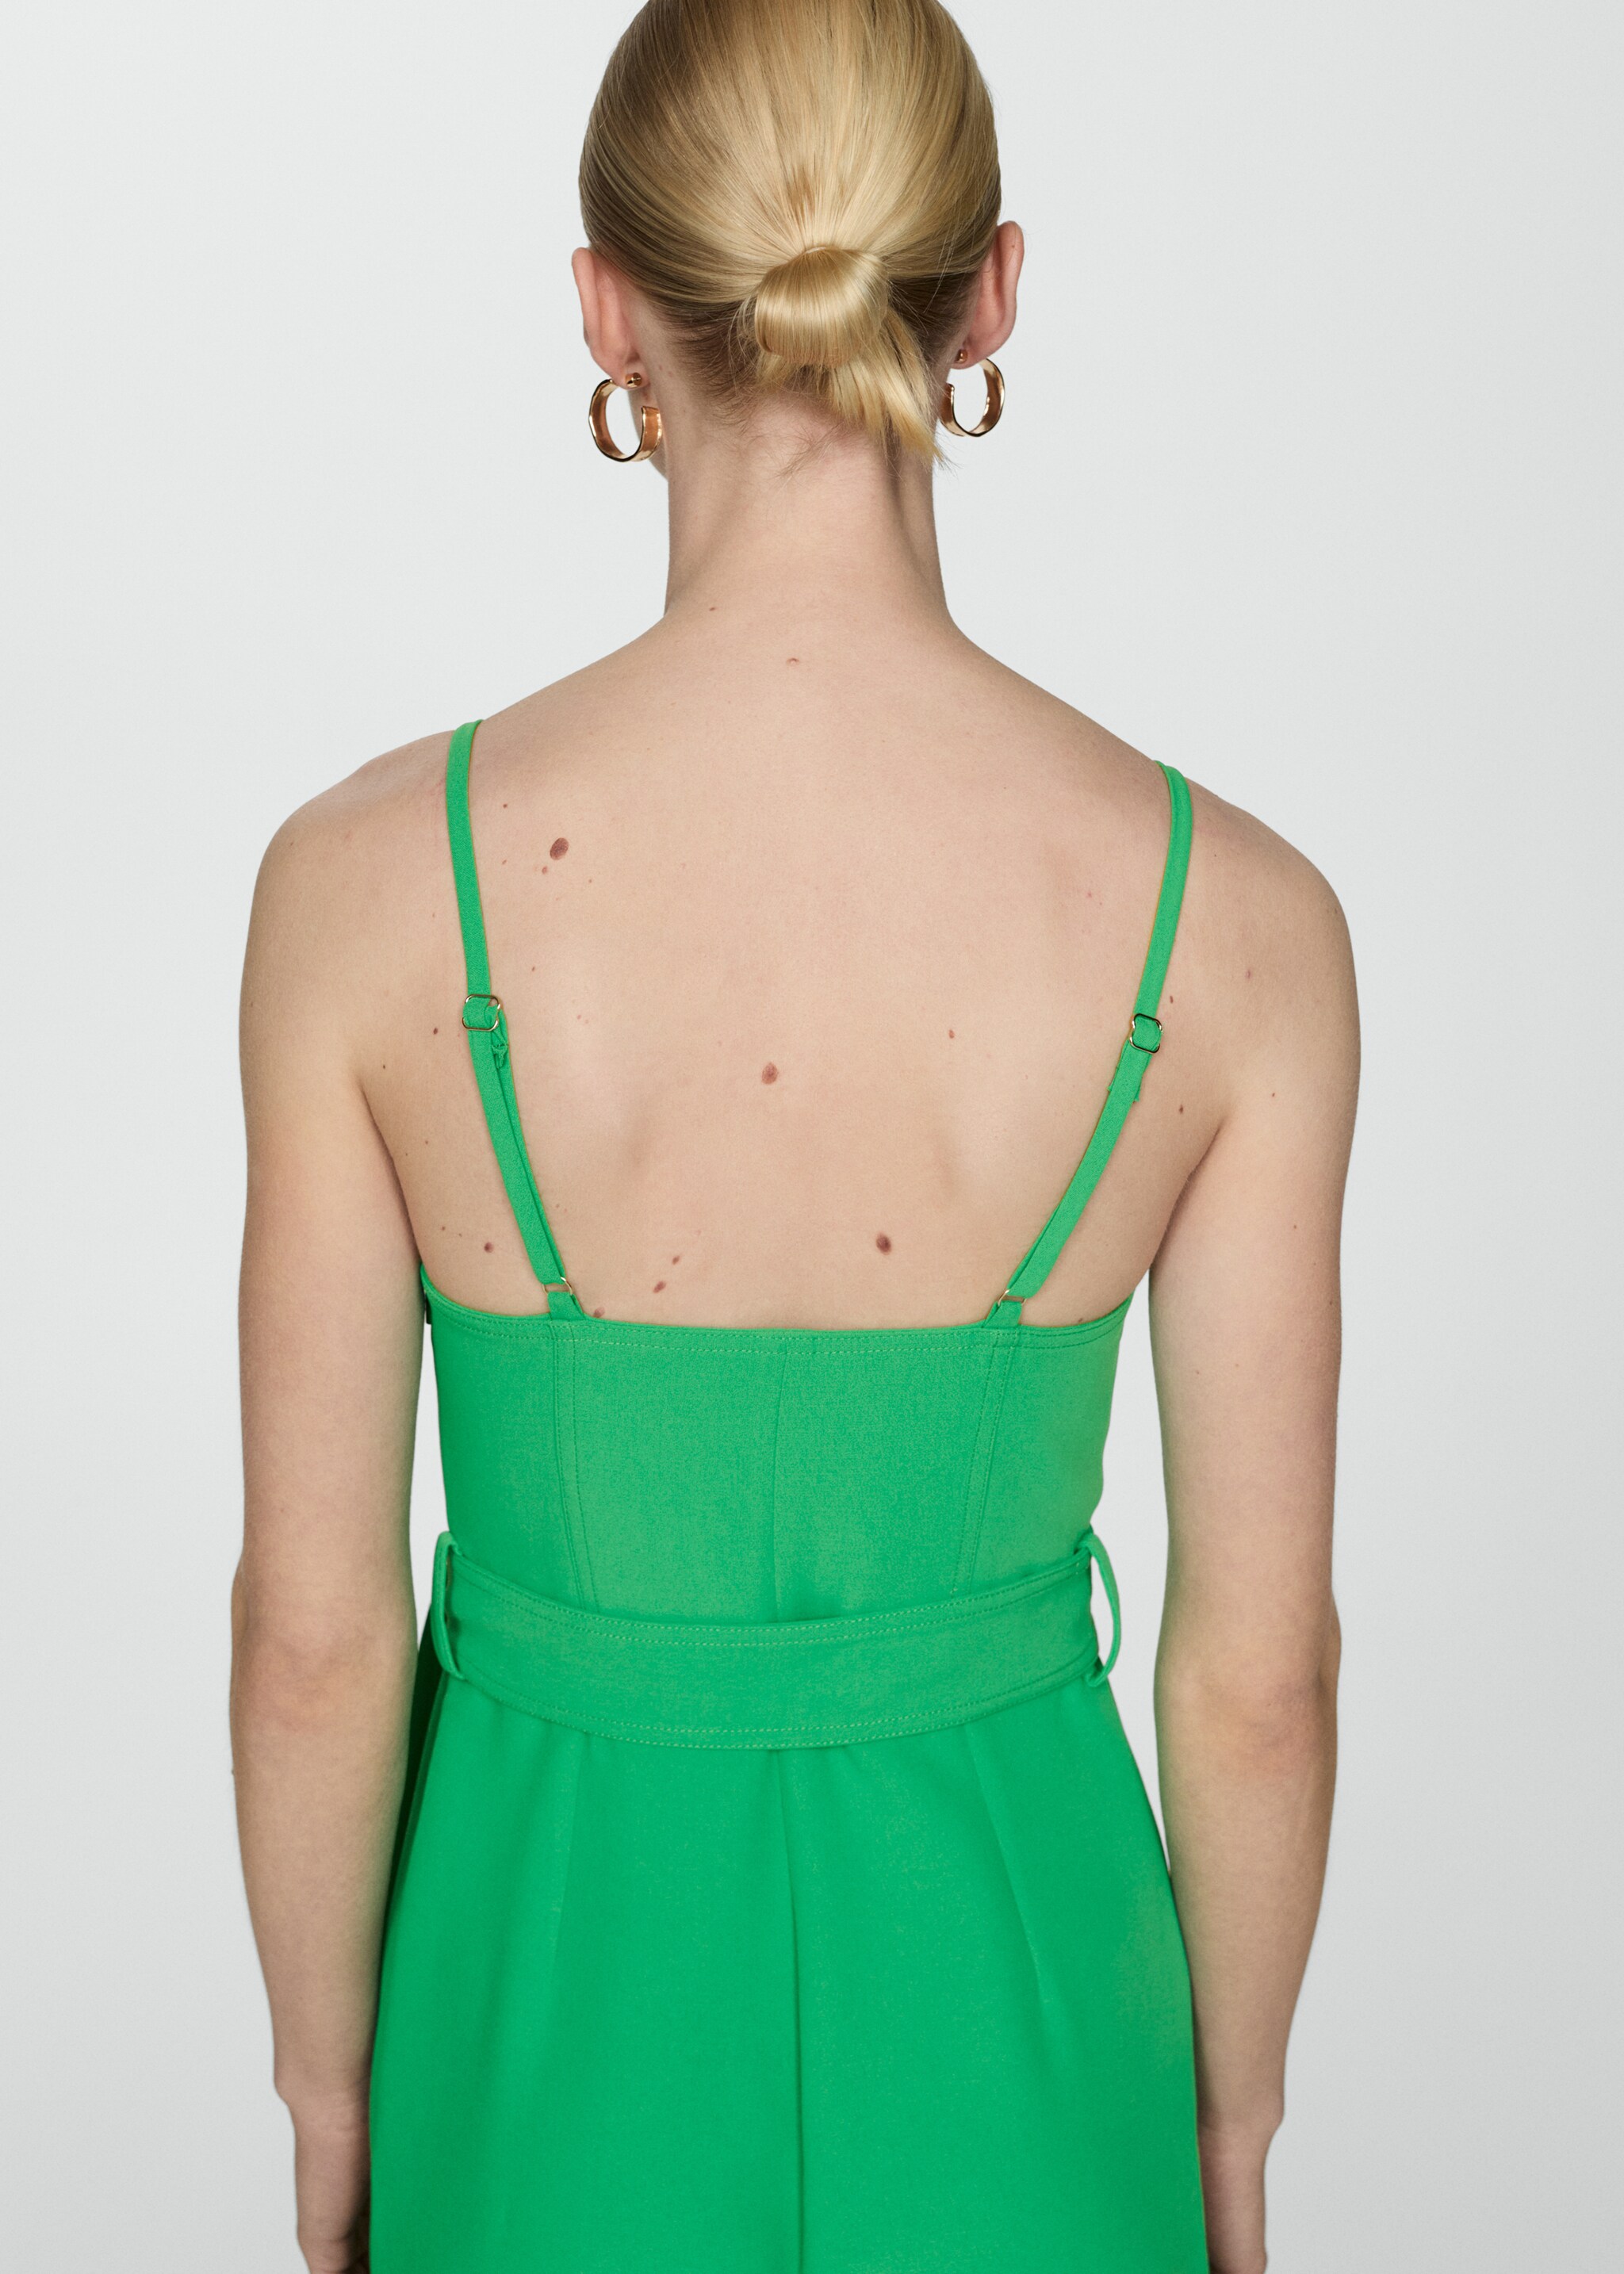 Bow long jumpsuit - Reverse of the article